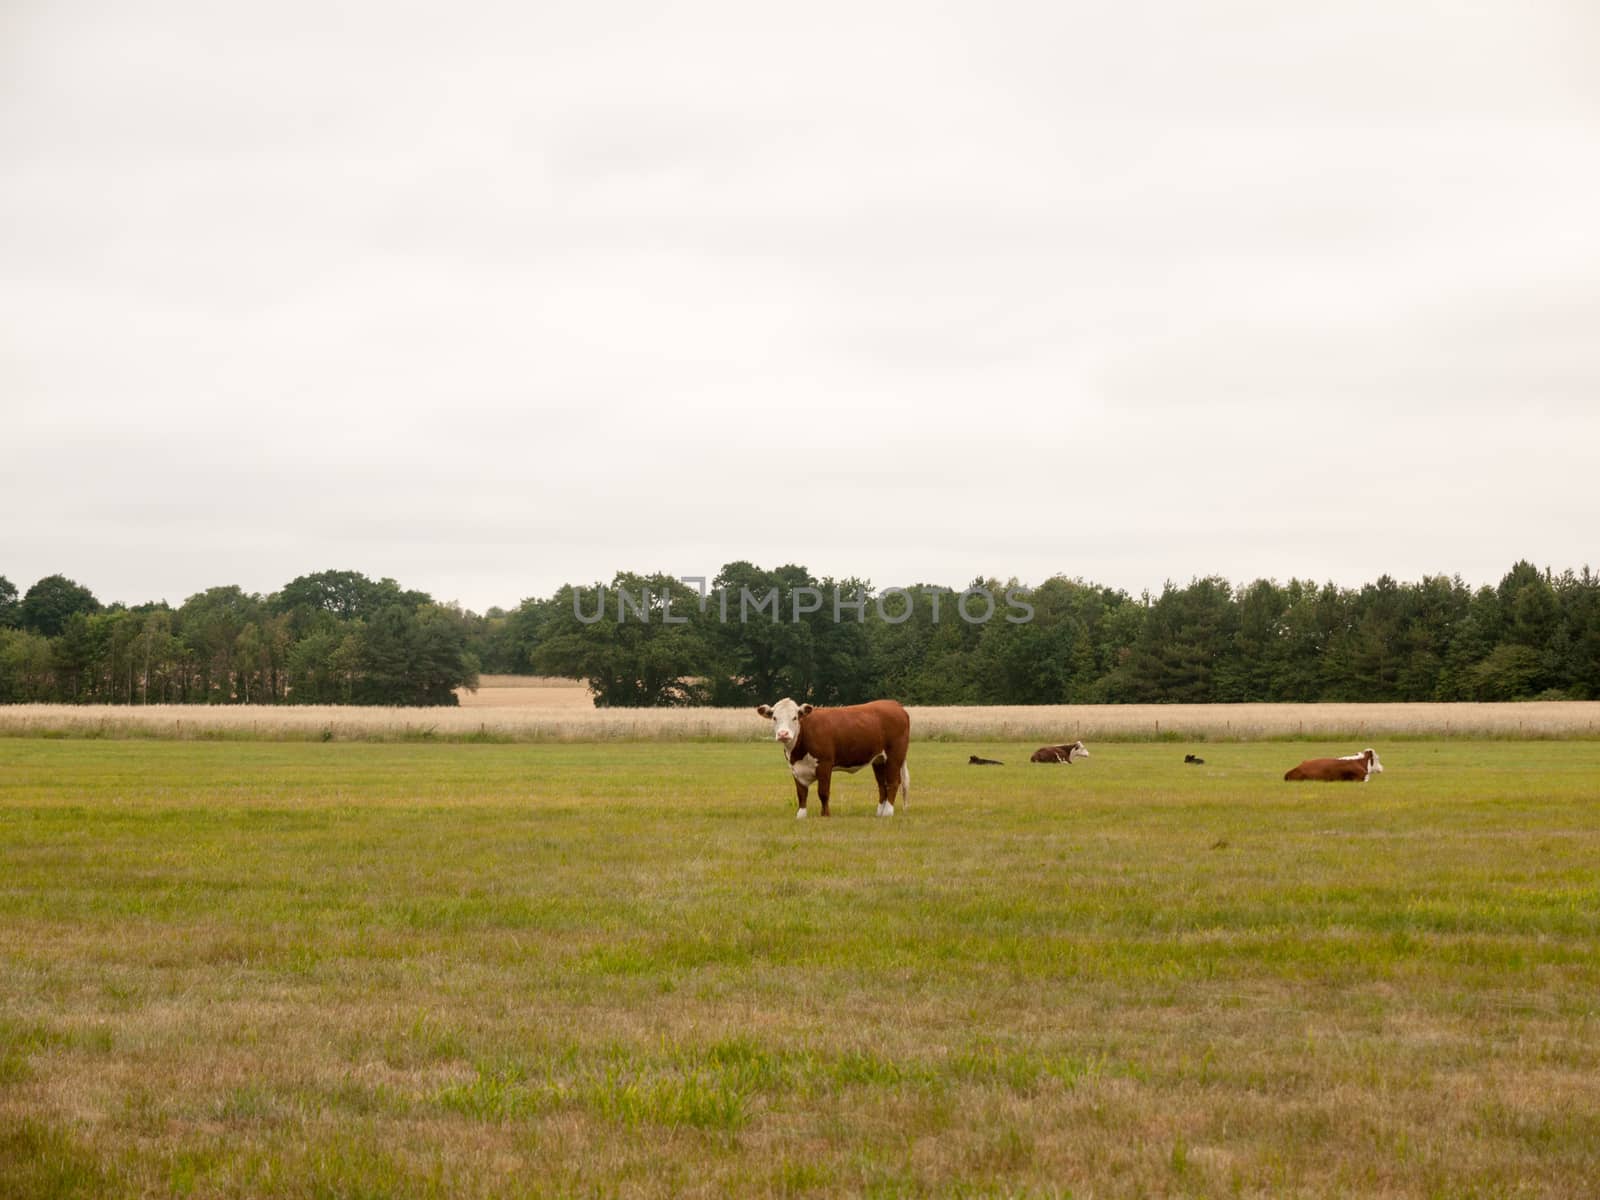 Cows in a Farmer's Field on An Overcast Day by callumrc